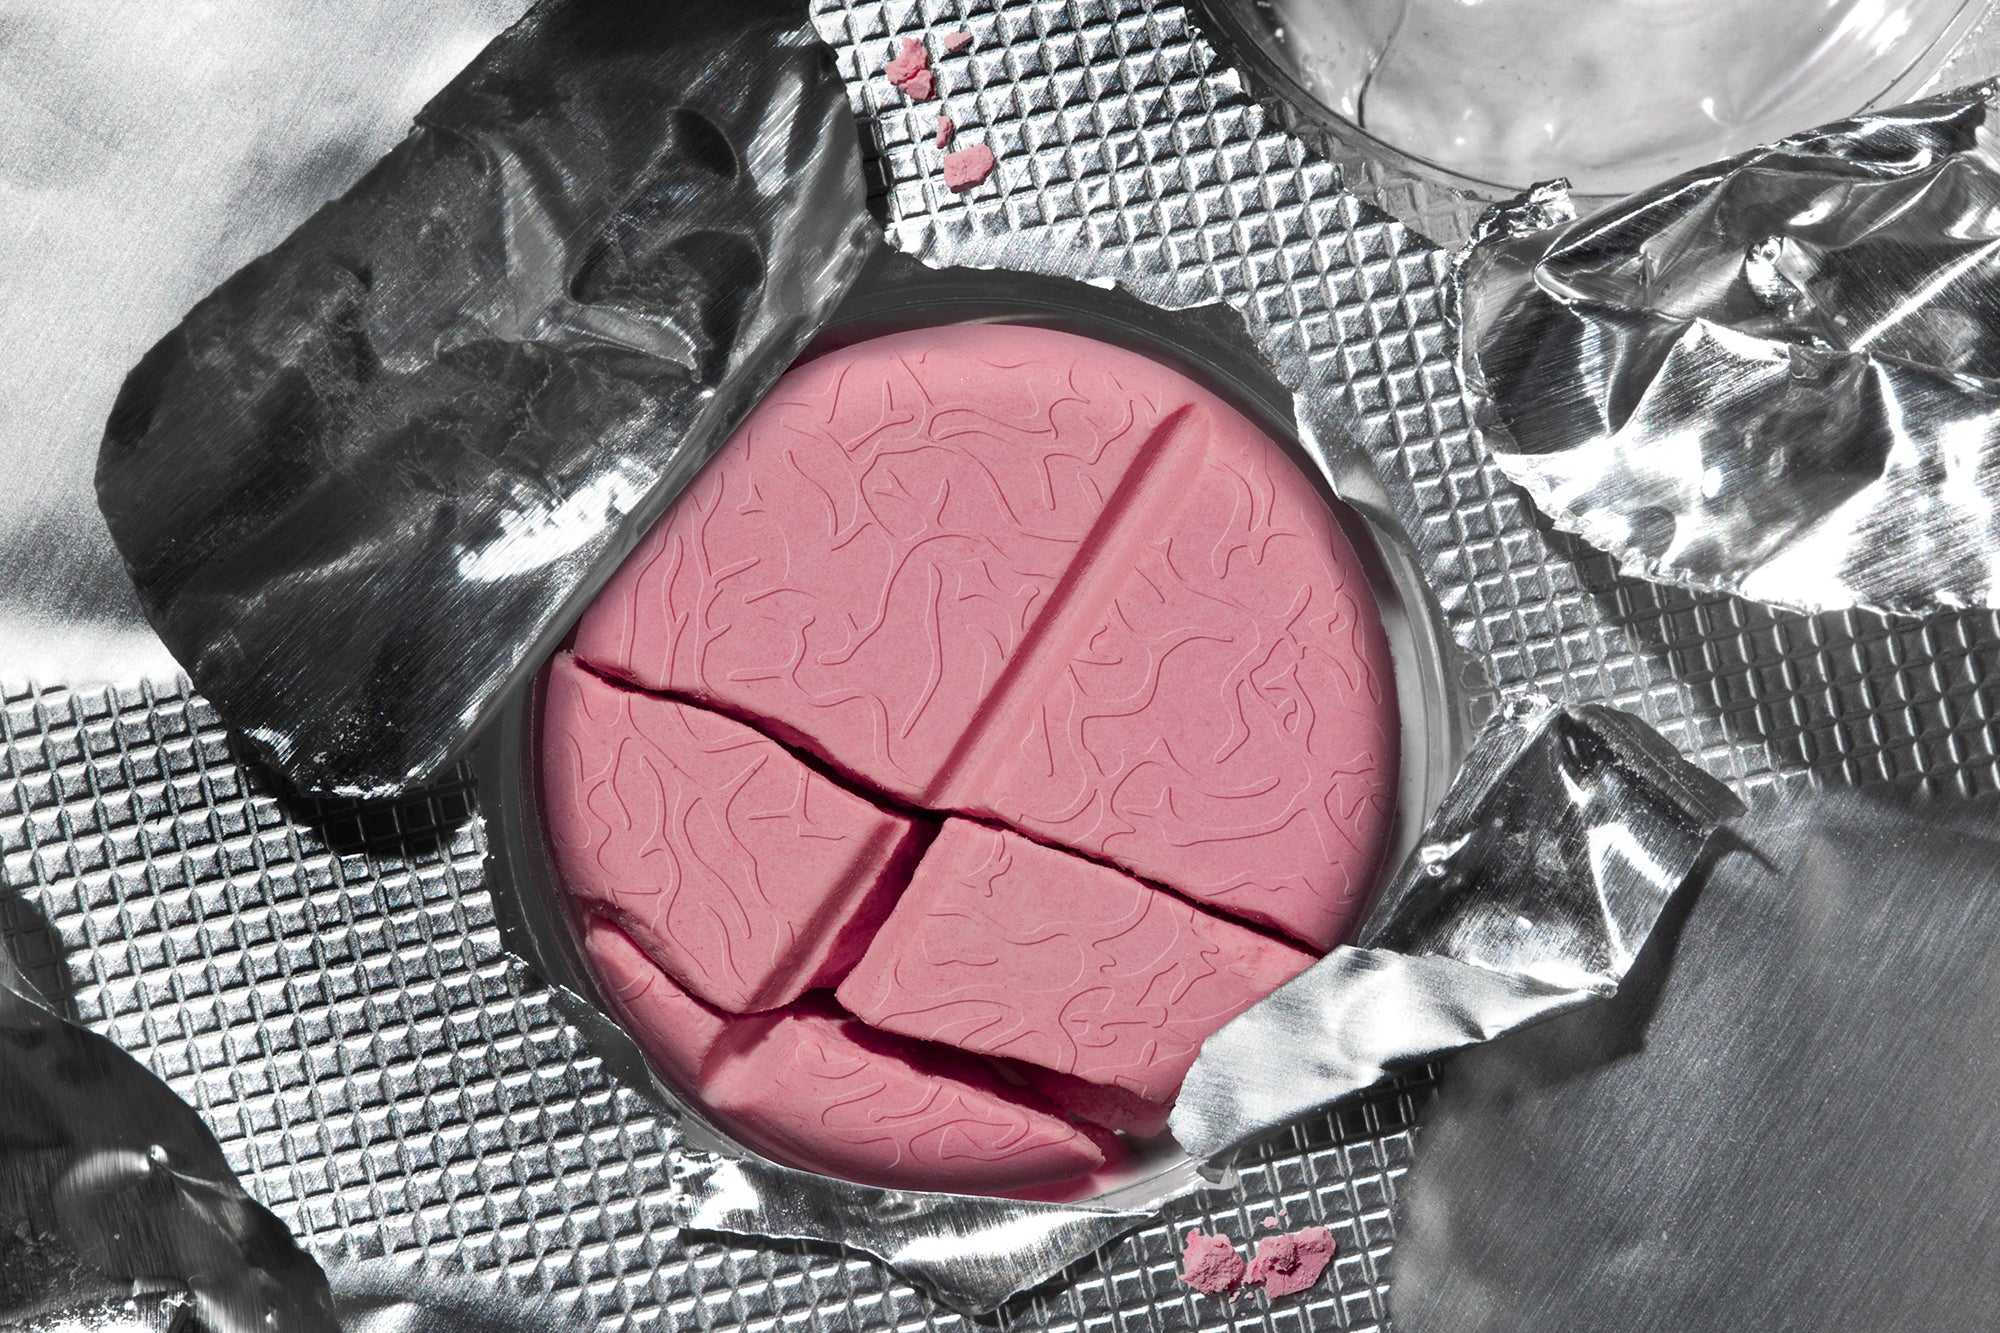 An open blister pack with a round pink broken tablet pill inside. The pill has subtle texture resembling an illustration depicting folds of the brain